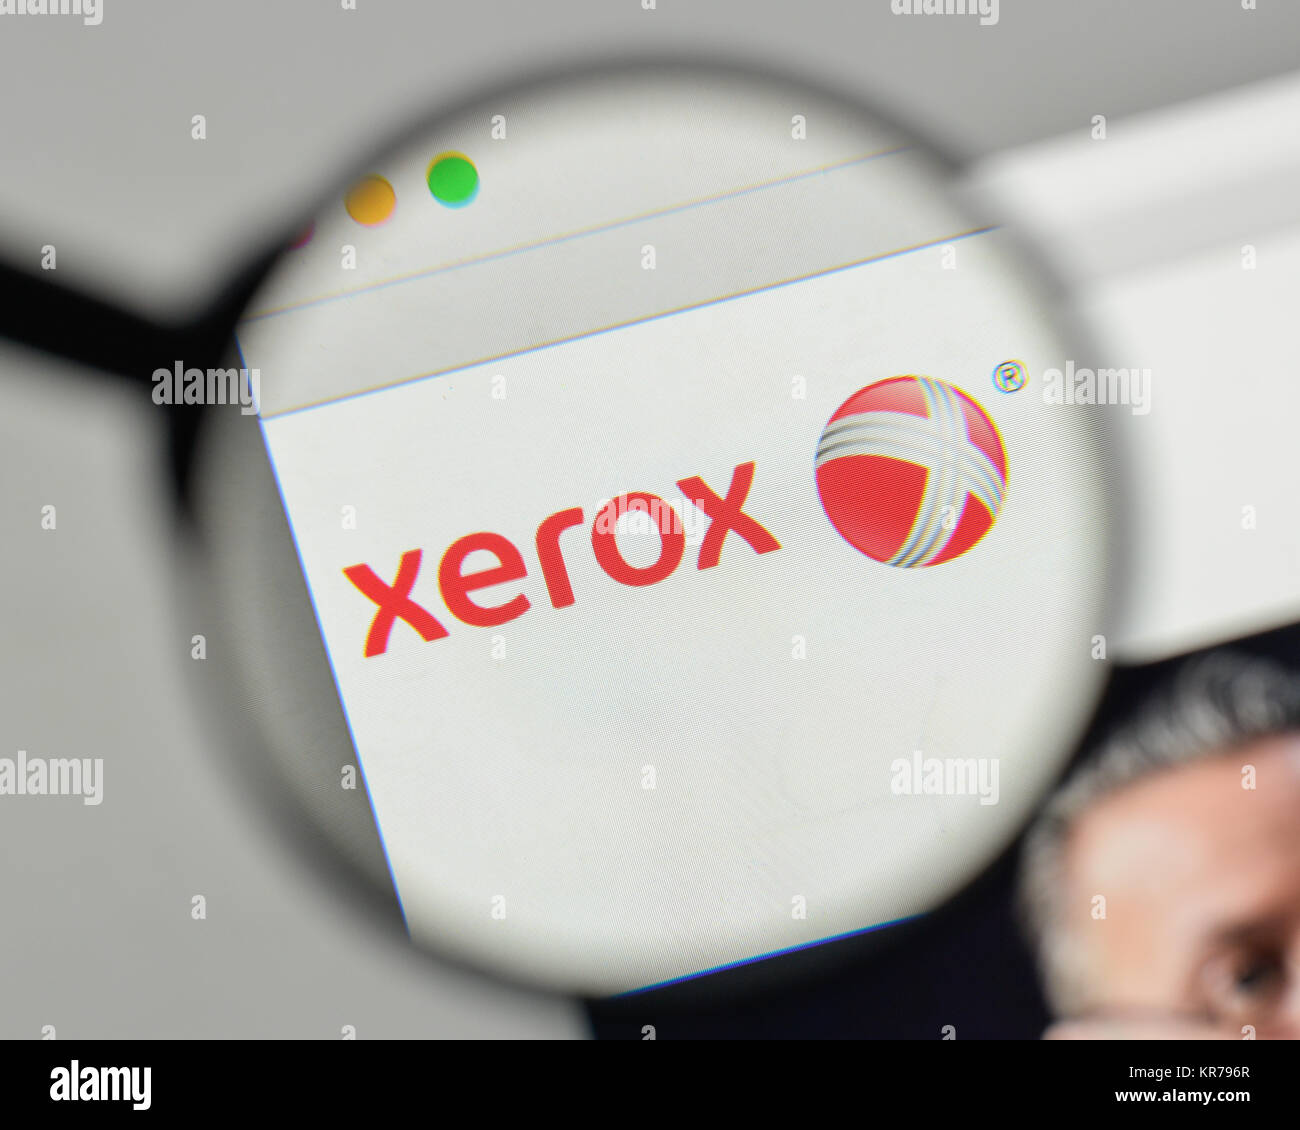 Xerox Logo High Resolution Stock Photography And Images Alamy